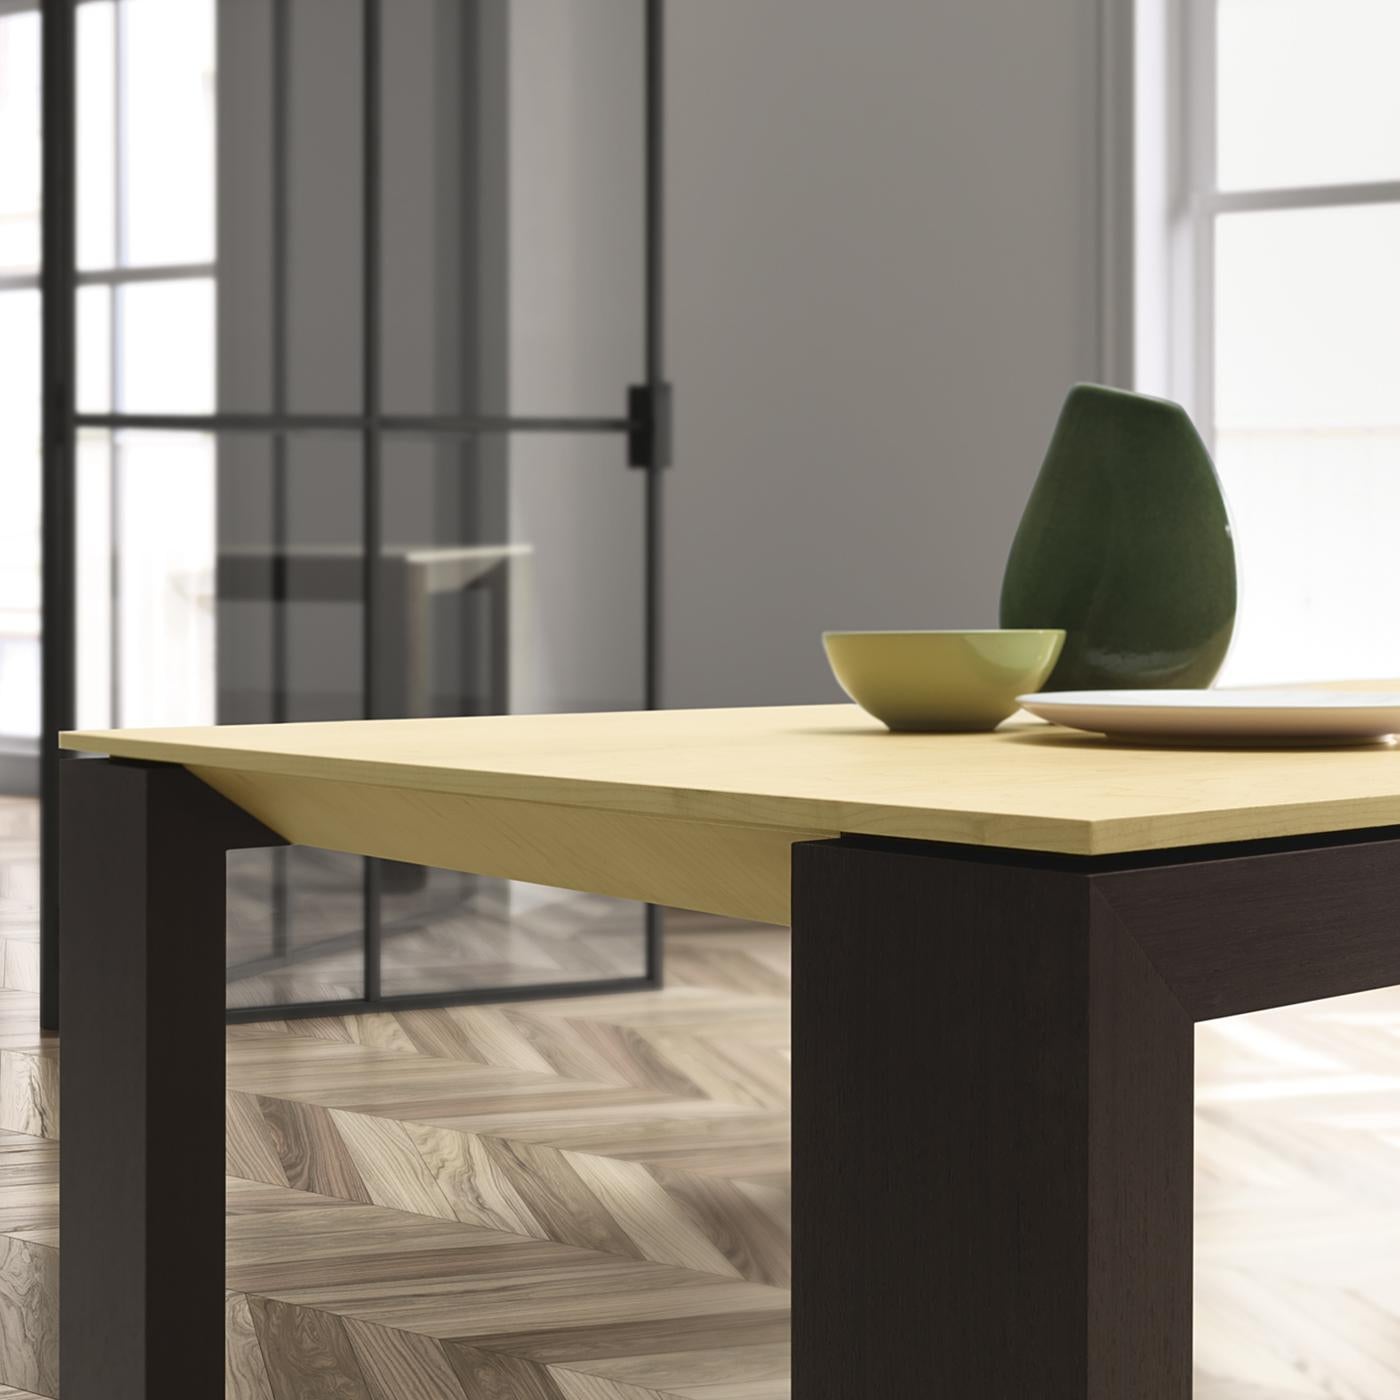 This all-wood table will be a beautiful centerpiece for any dining or living space with a contemporary flare. Sleek design and simple forms are what this long, rectangular table is all about, with dark kotò wood frame and legs and a smooth, light